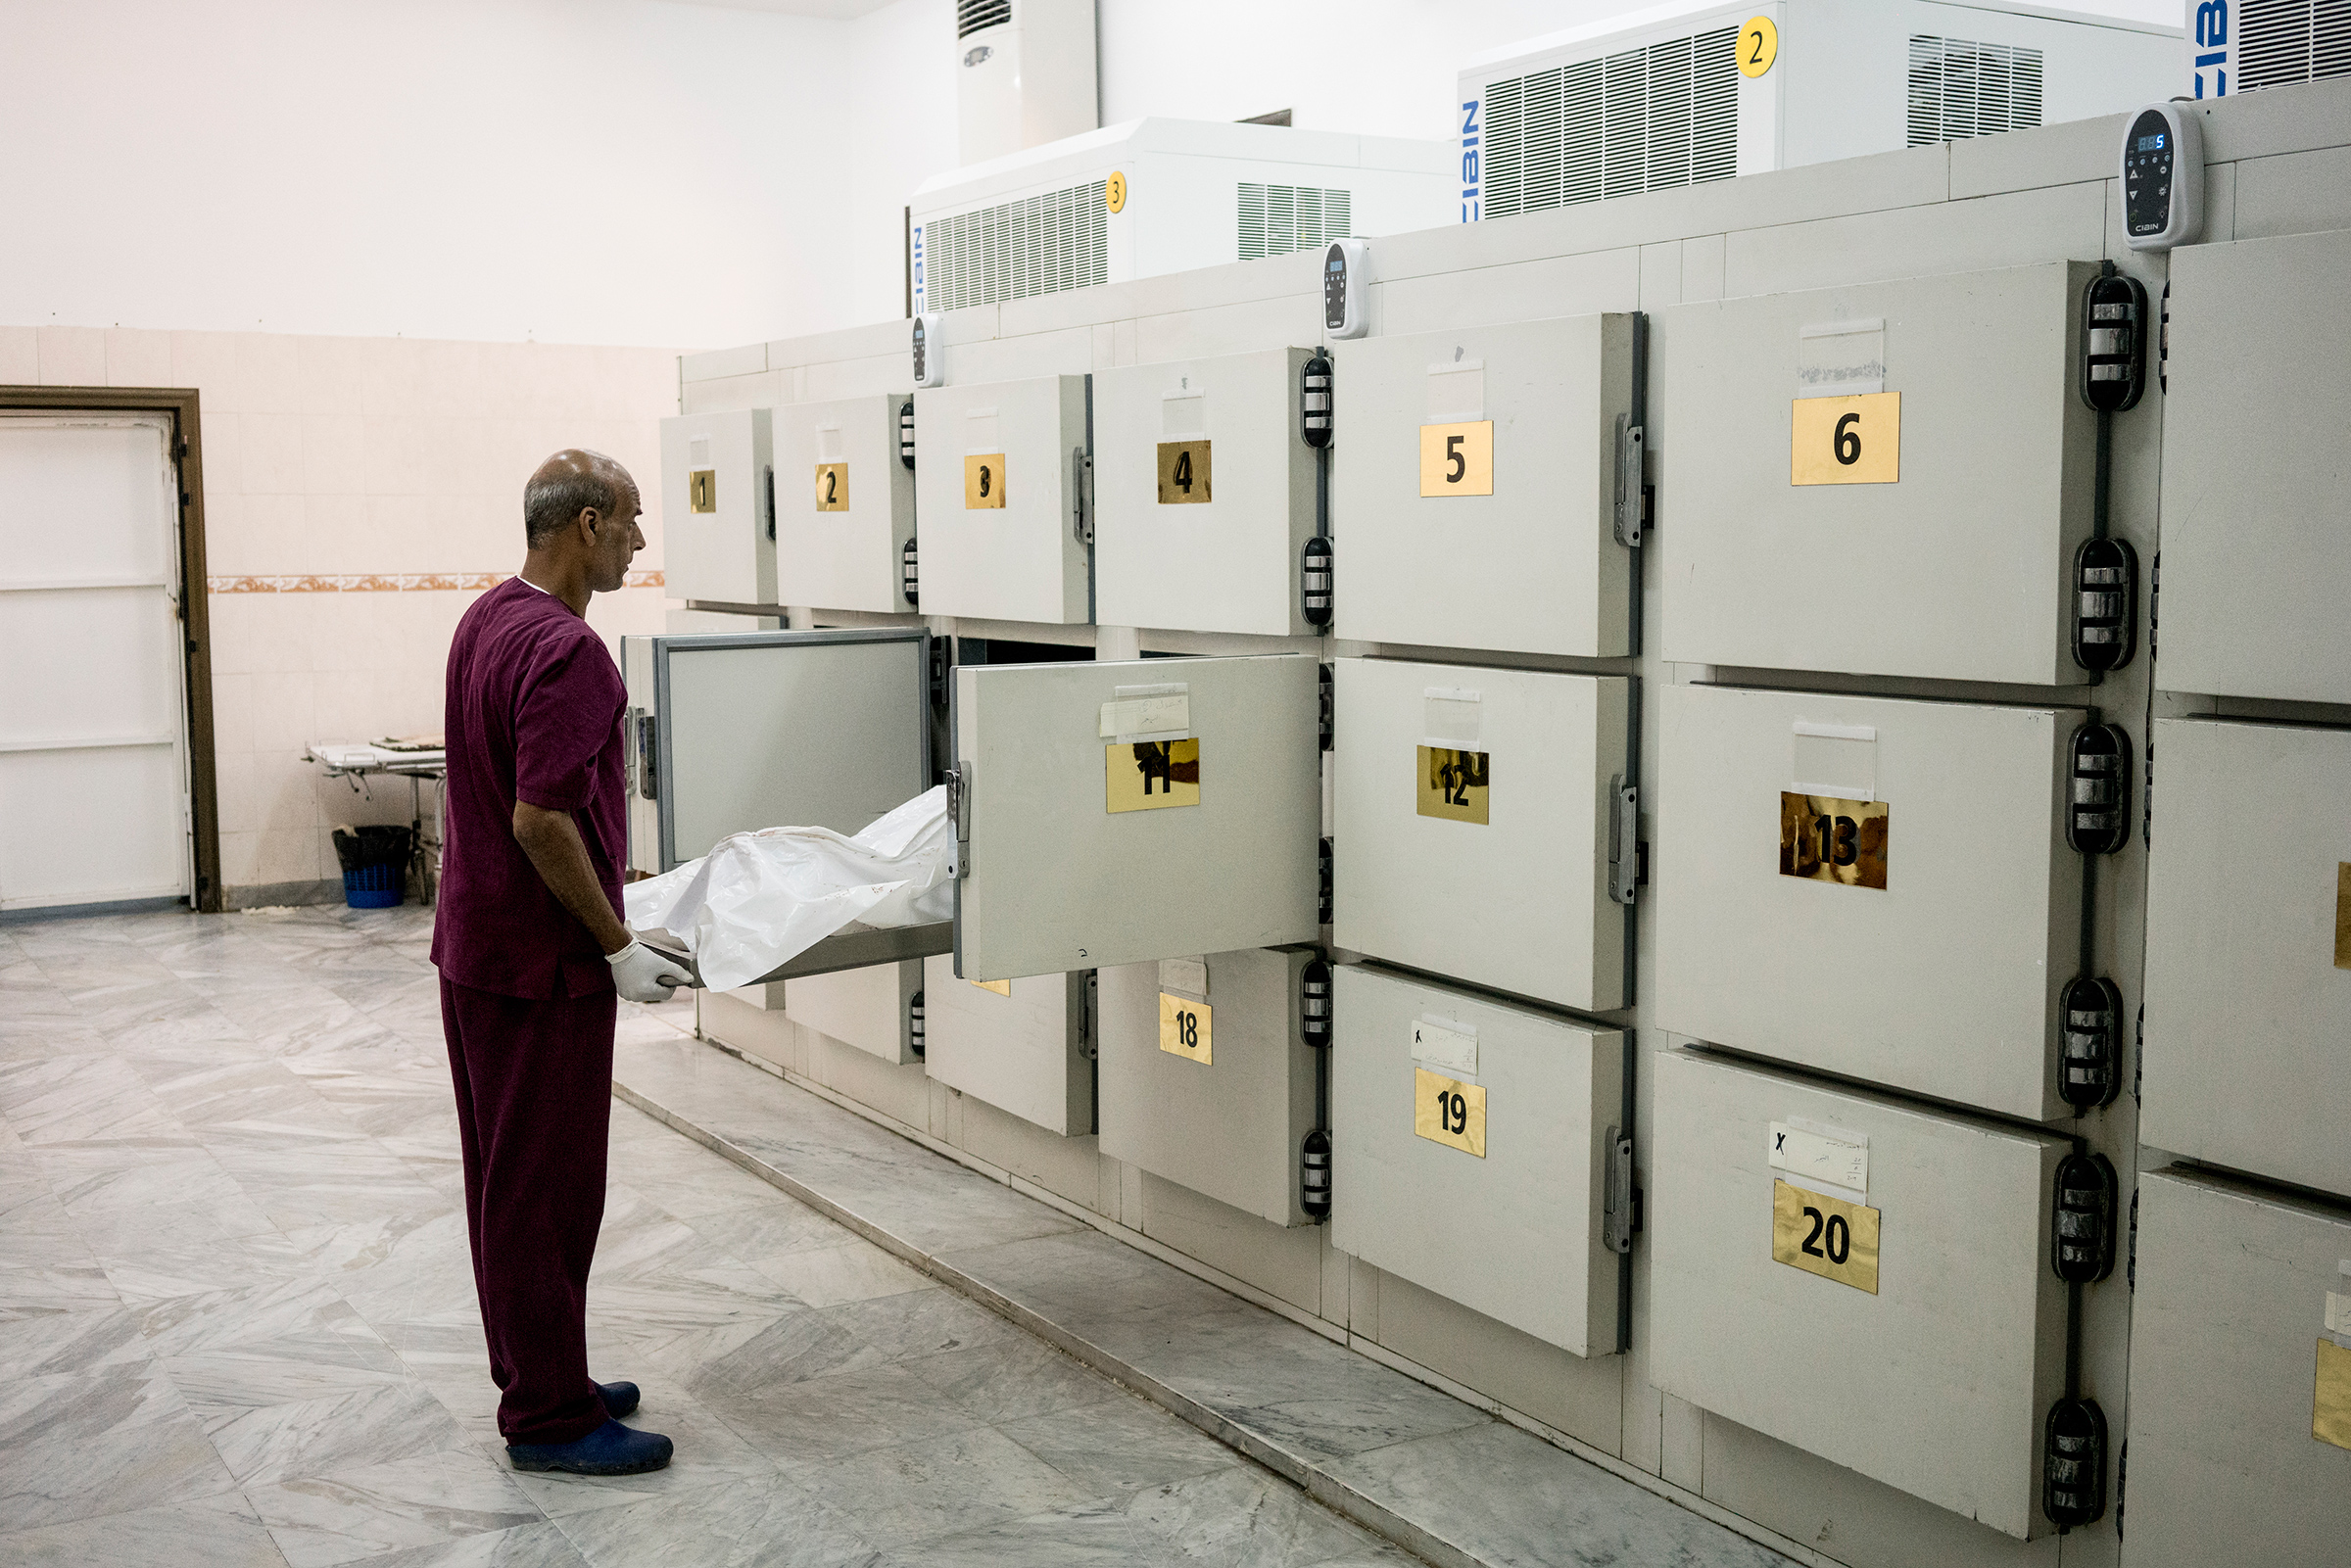 A body of a migrant killed in the airstrike is removed from a locker at the hospital morgue. (Emanuele Satolli)